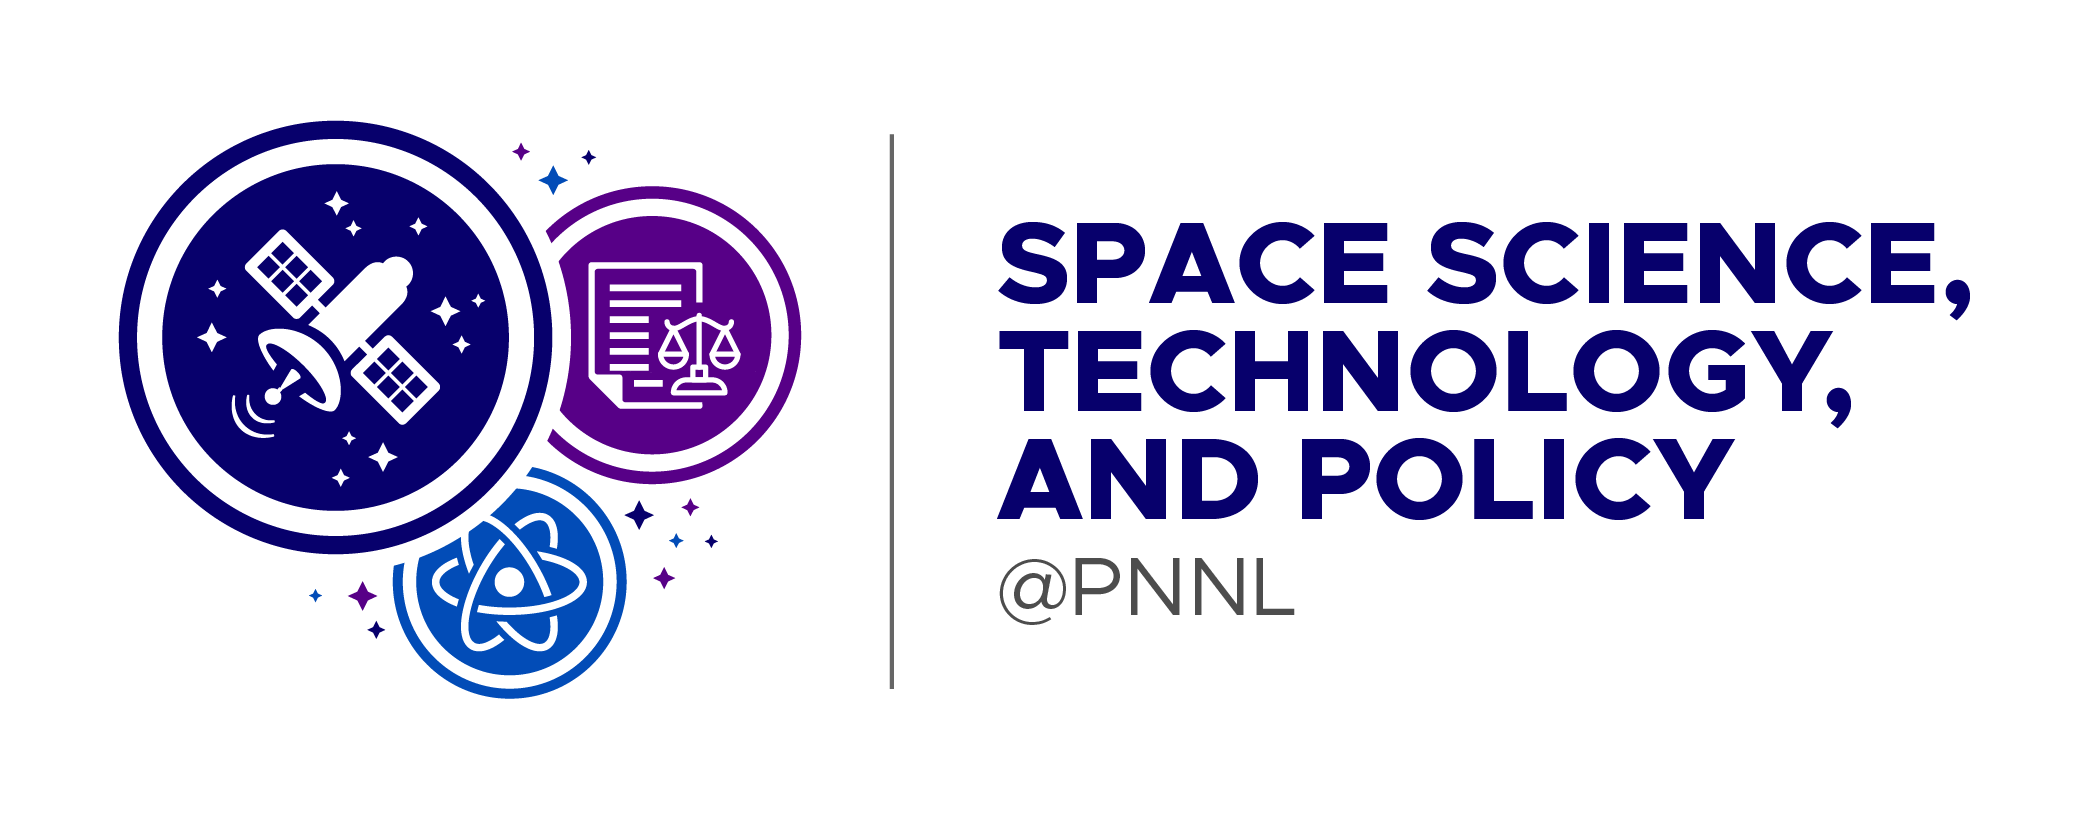 Space Science, Technology, and Policy